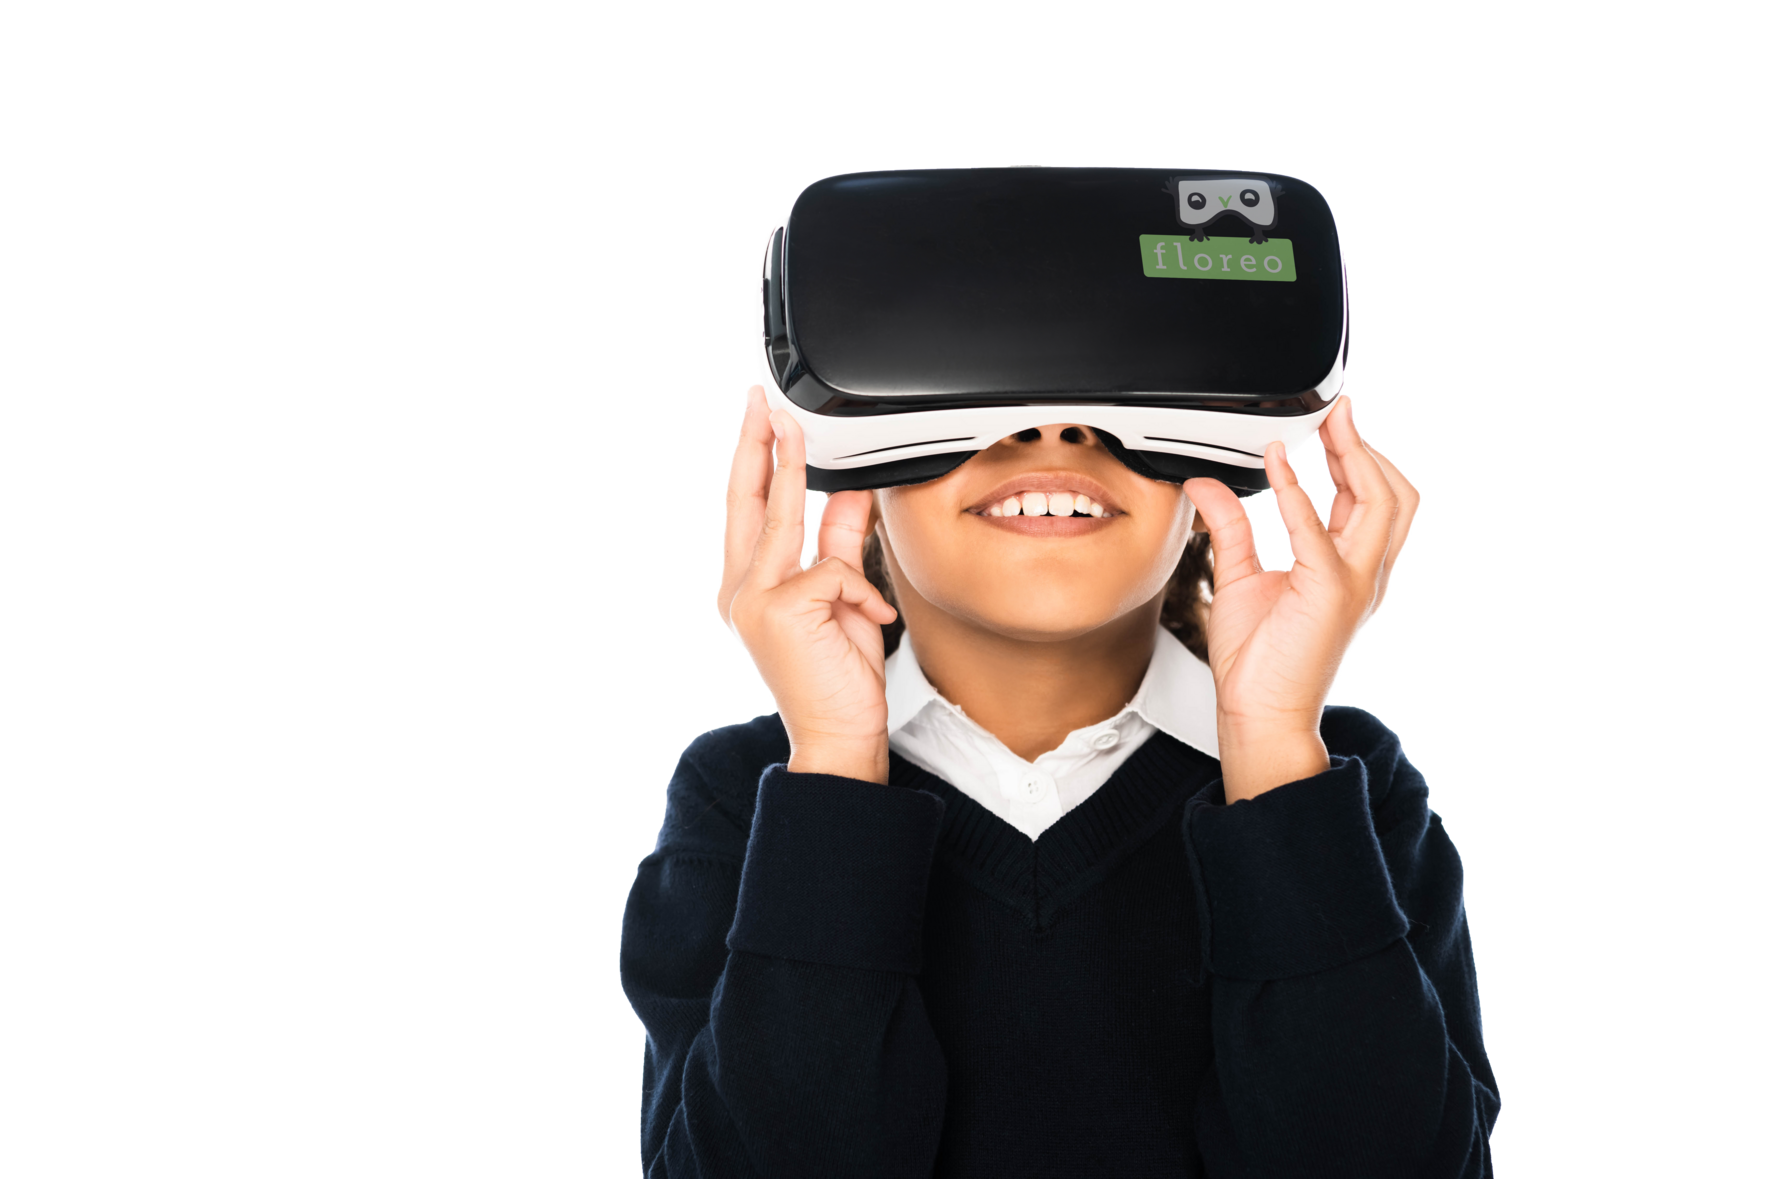 VR headset with Floreo logo